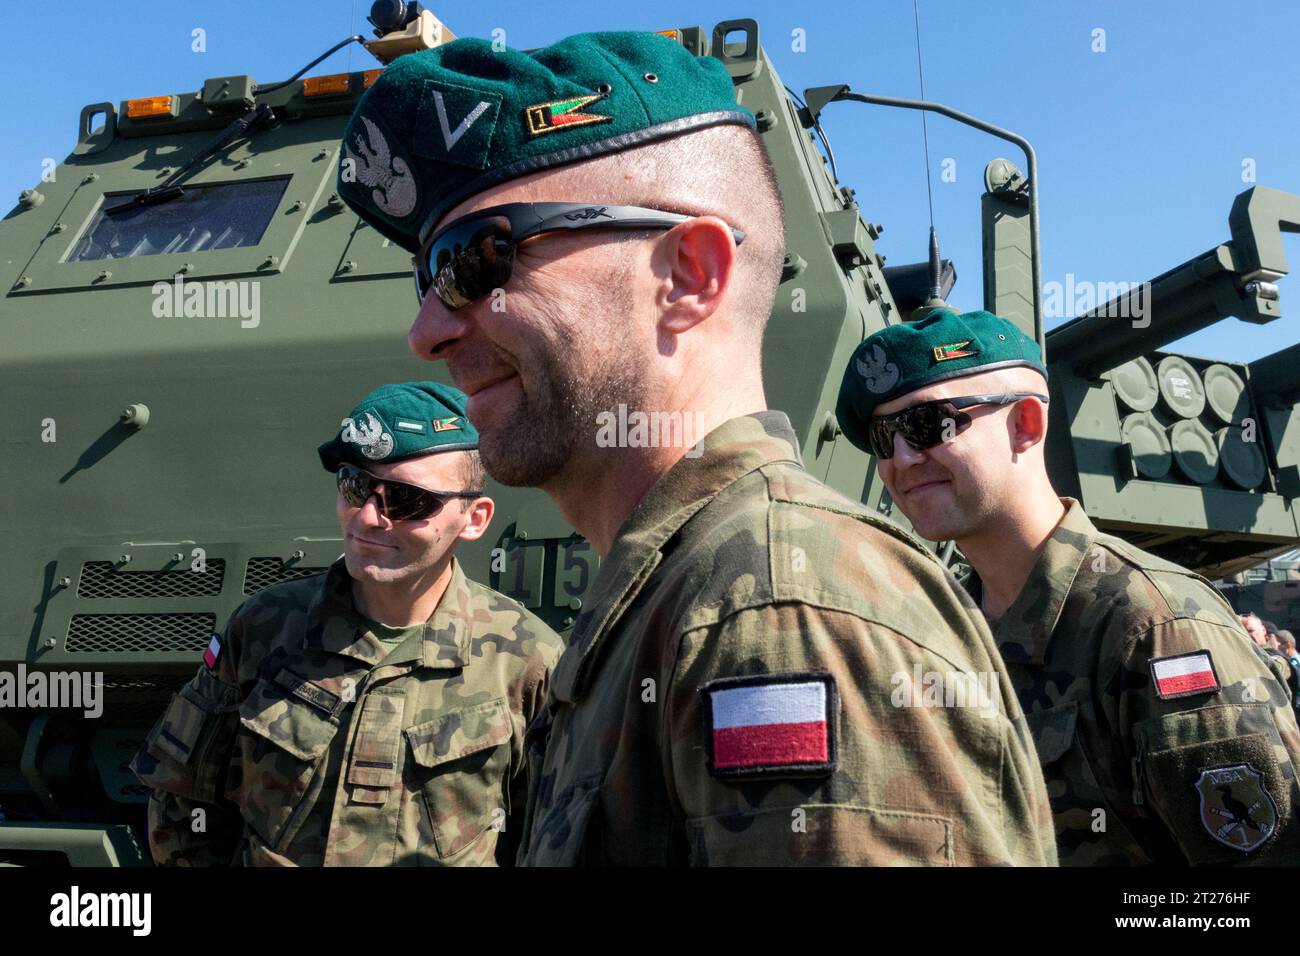 Polish soldiers, operating M142 HIMARS Stock Photo